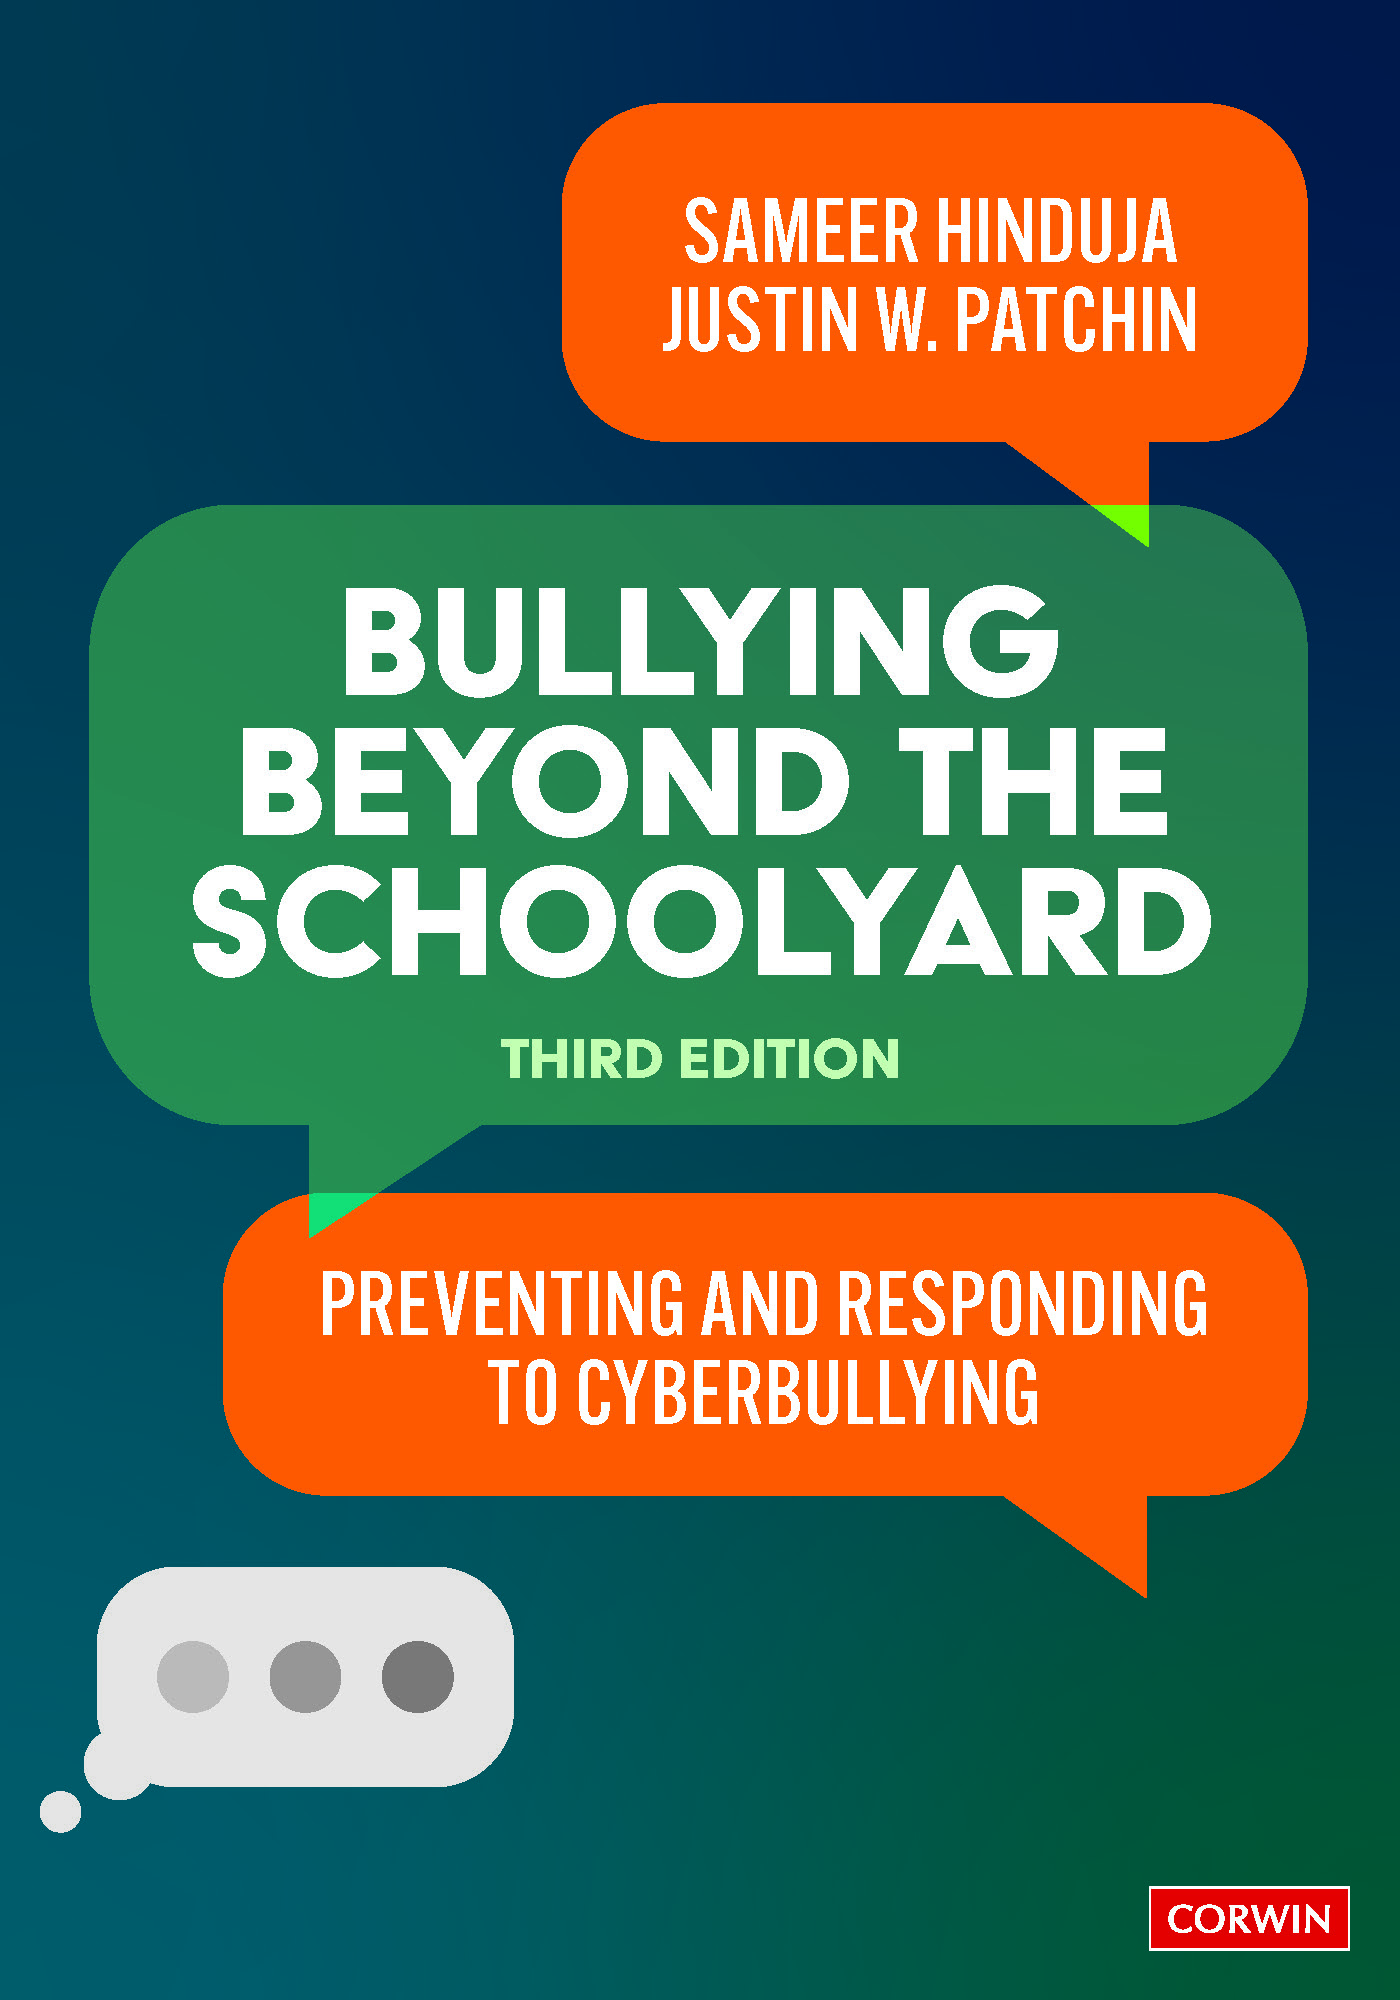 Bullying Beyond the Schoolyard: Preventing and Responding to Cyberbullying (3rd edition) post thumbnail